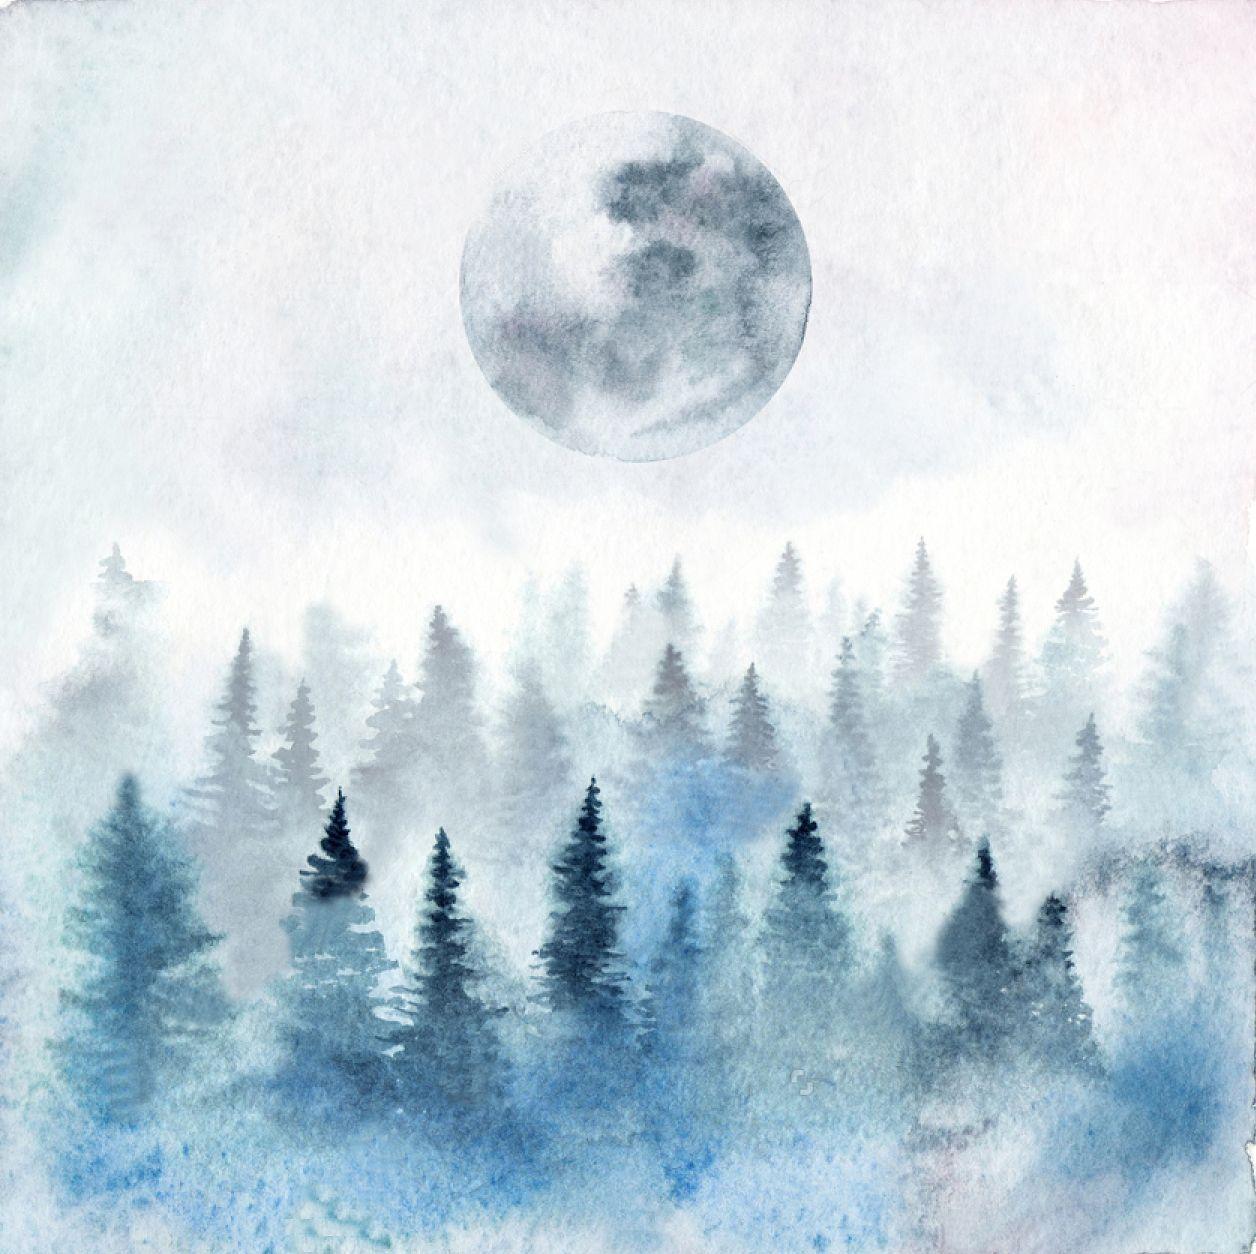 Free Winter Backgrounds - Watercolor Art Graphic by Magiclily